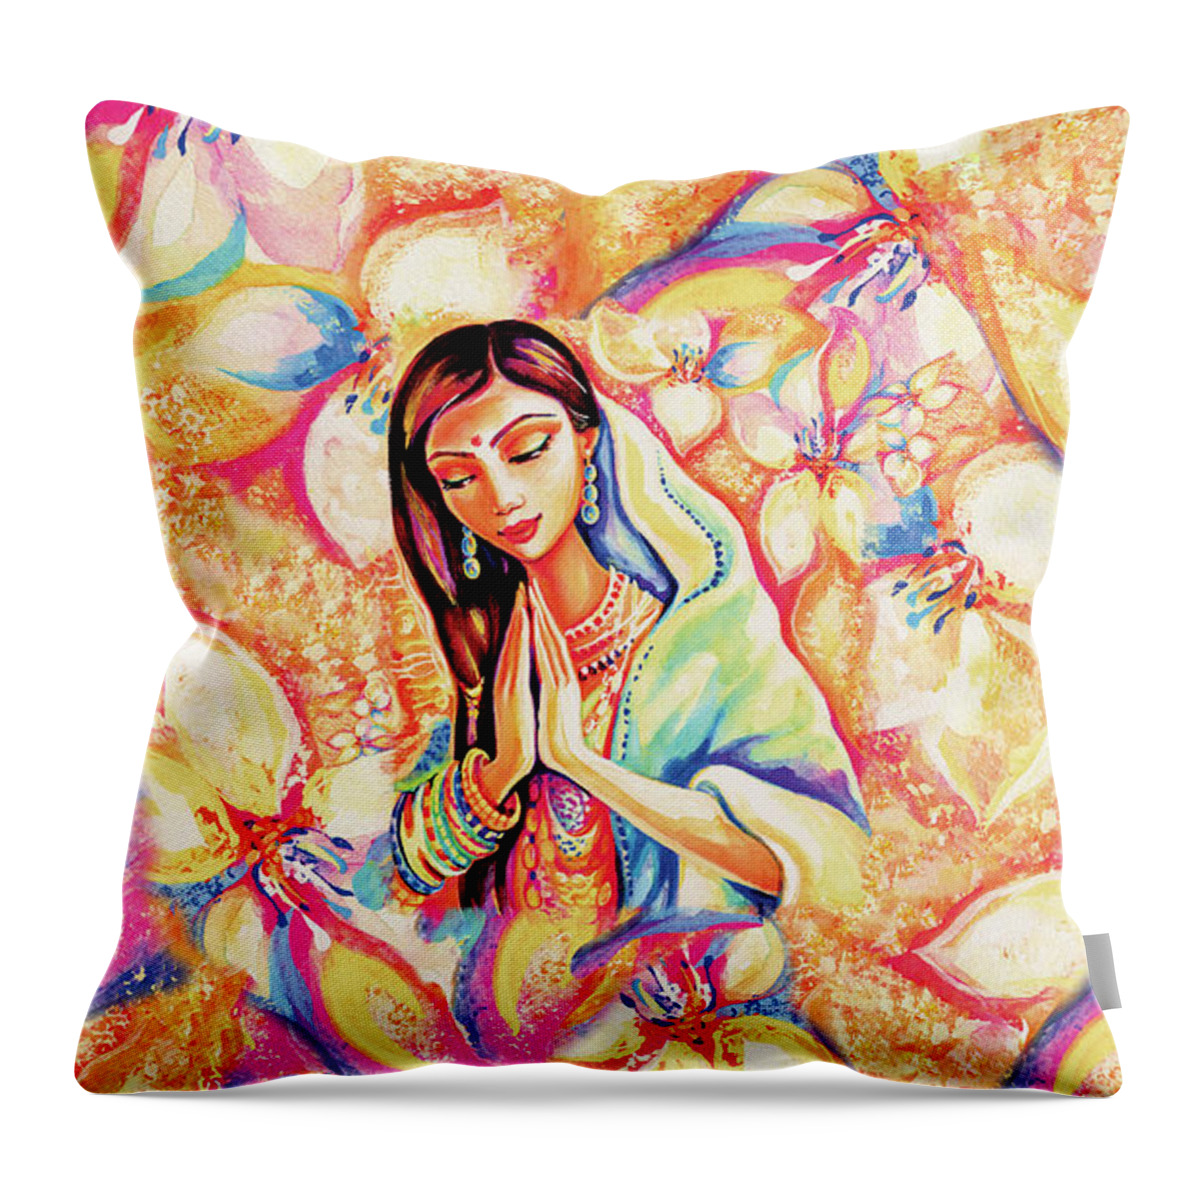 Praying Woman Throw Pillow featuring the painting Little Himalayan Pray by Eva Campbell